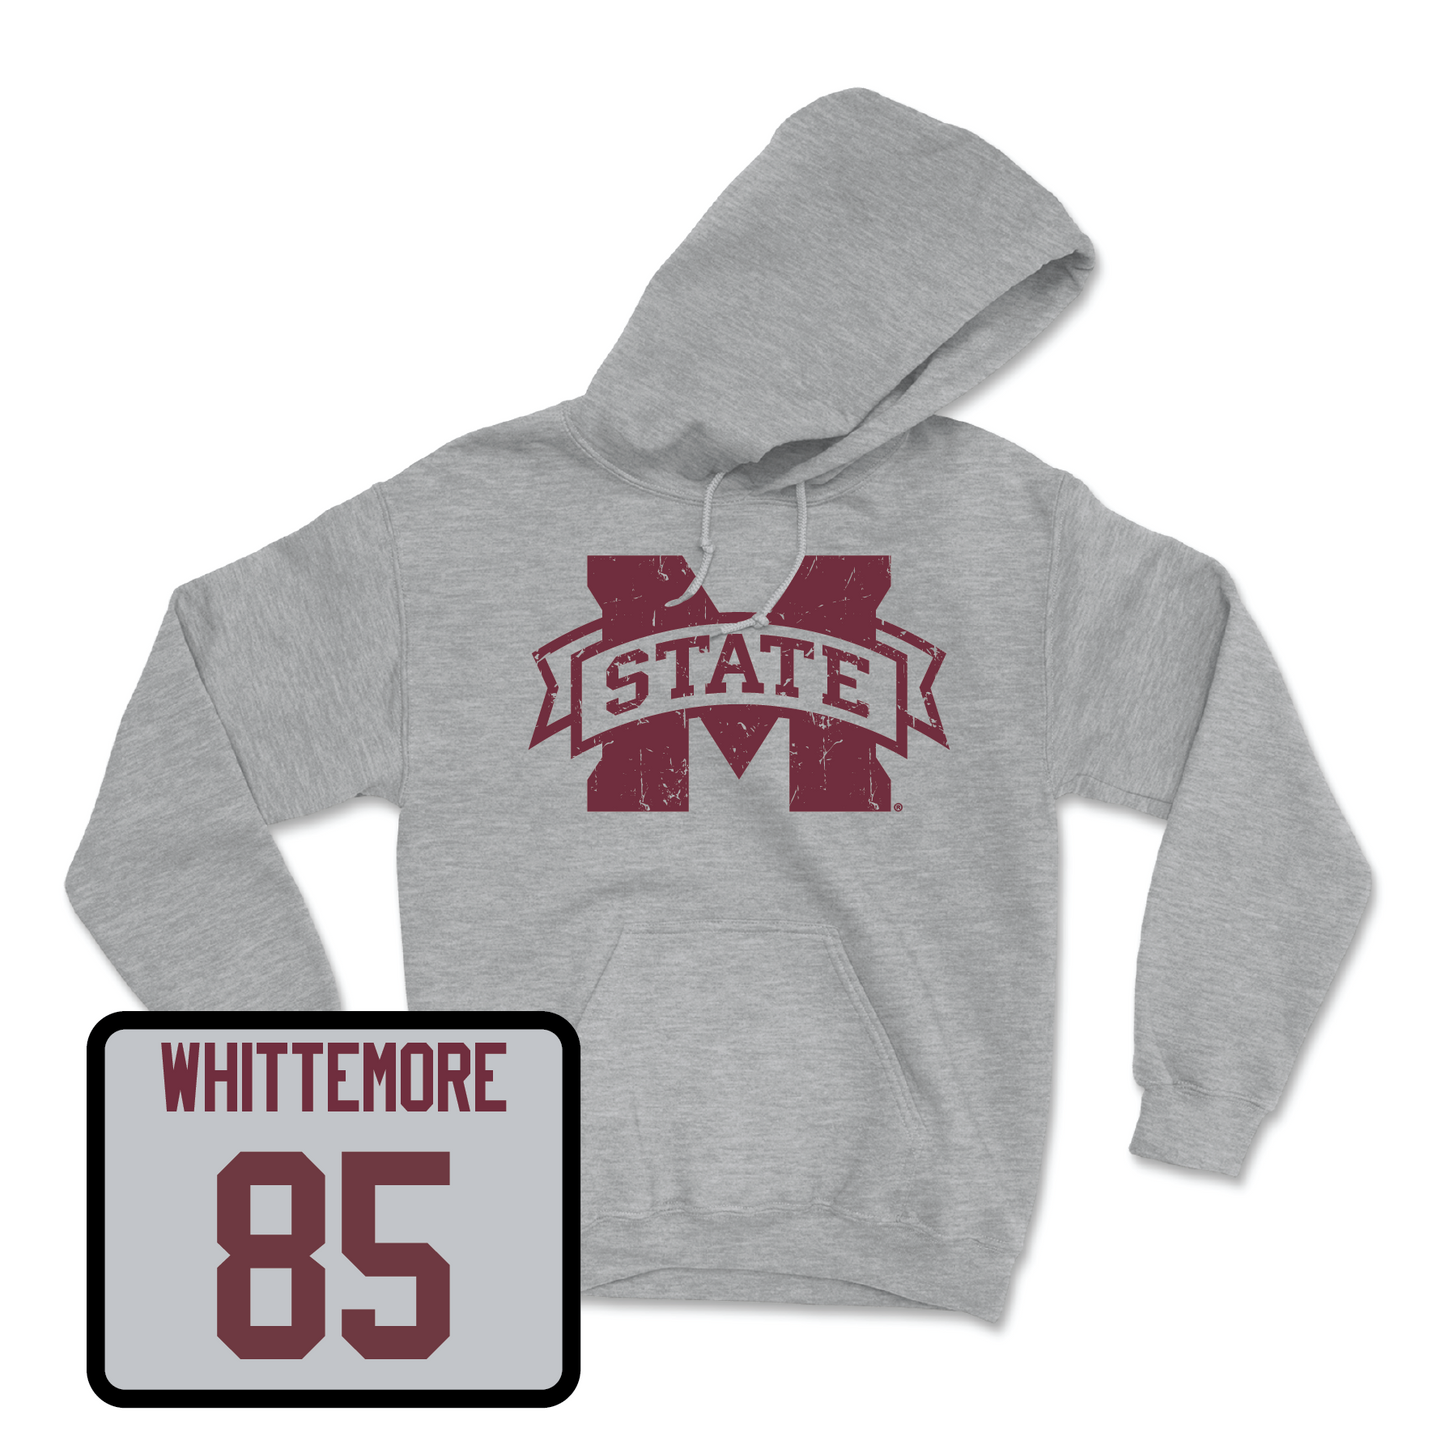 Sport Grey Football Classic Hoodie Youth Medium / Creed Whittemore | #85